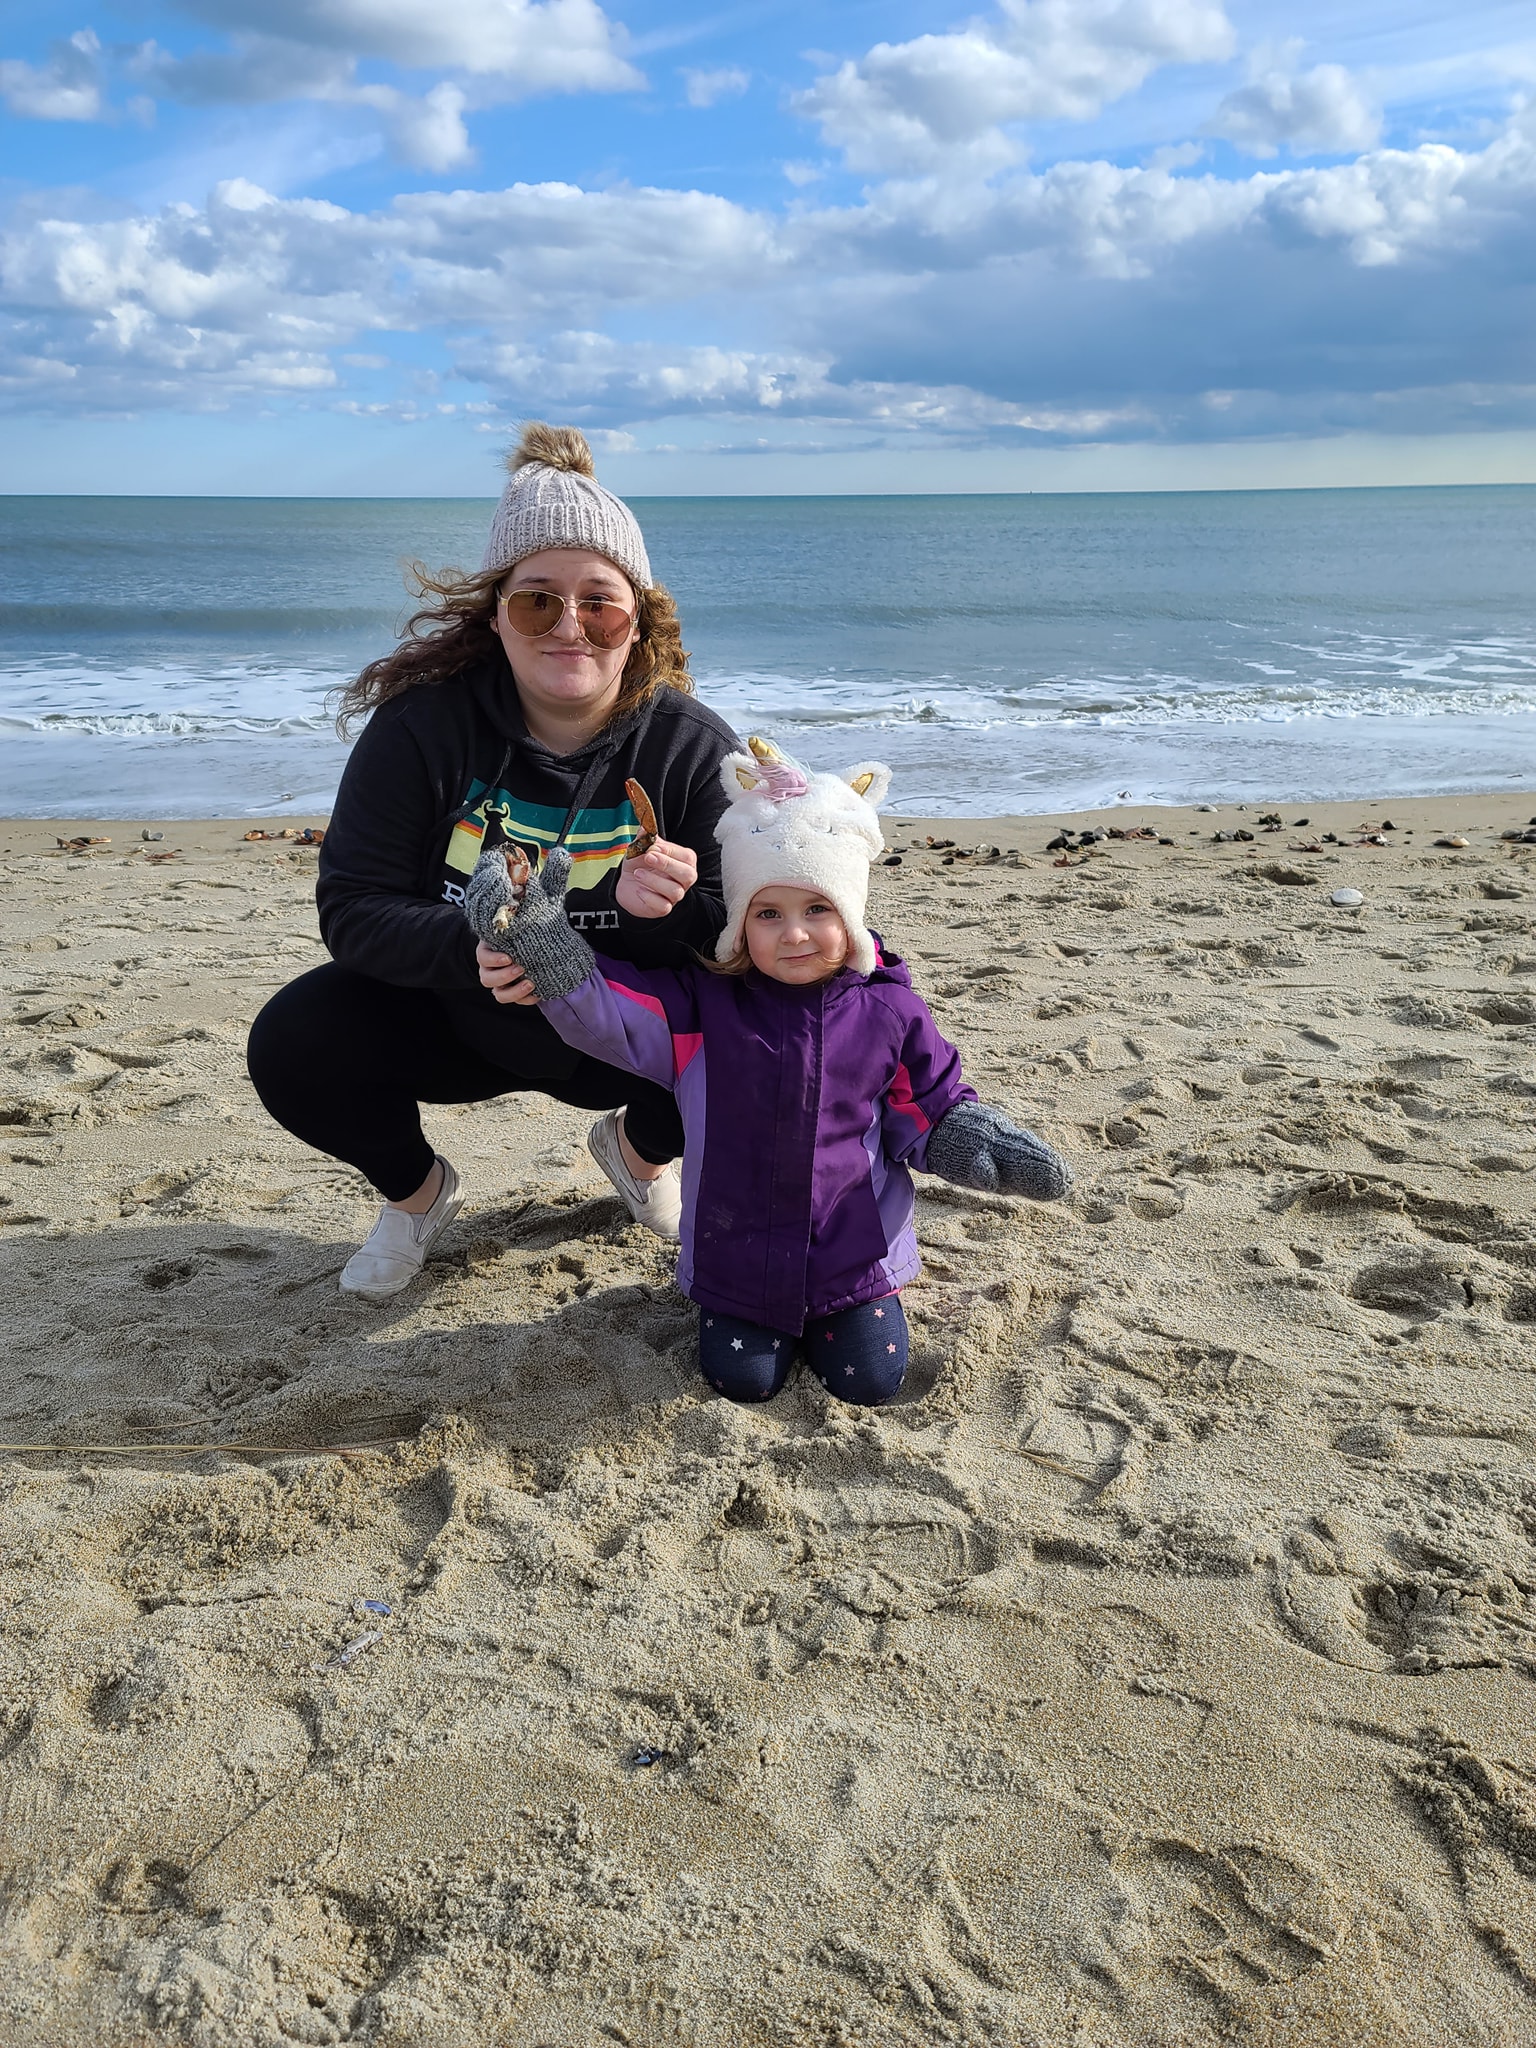 Heidi and her niece at the beach